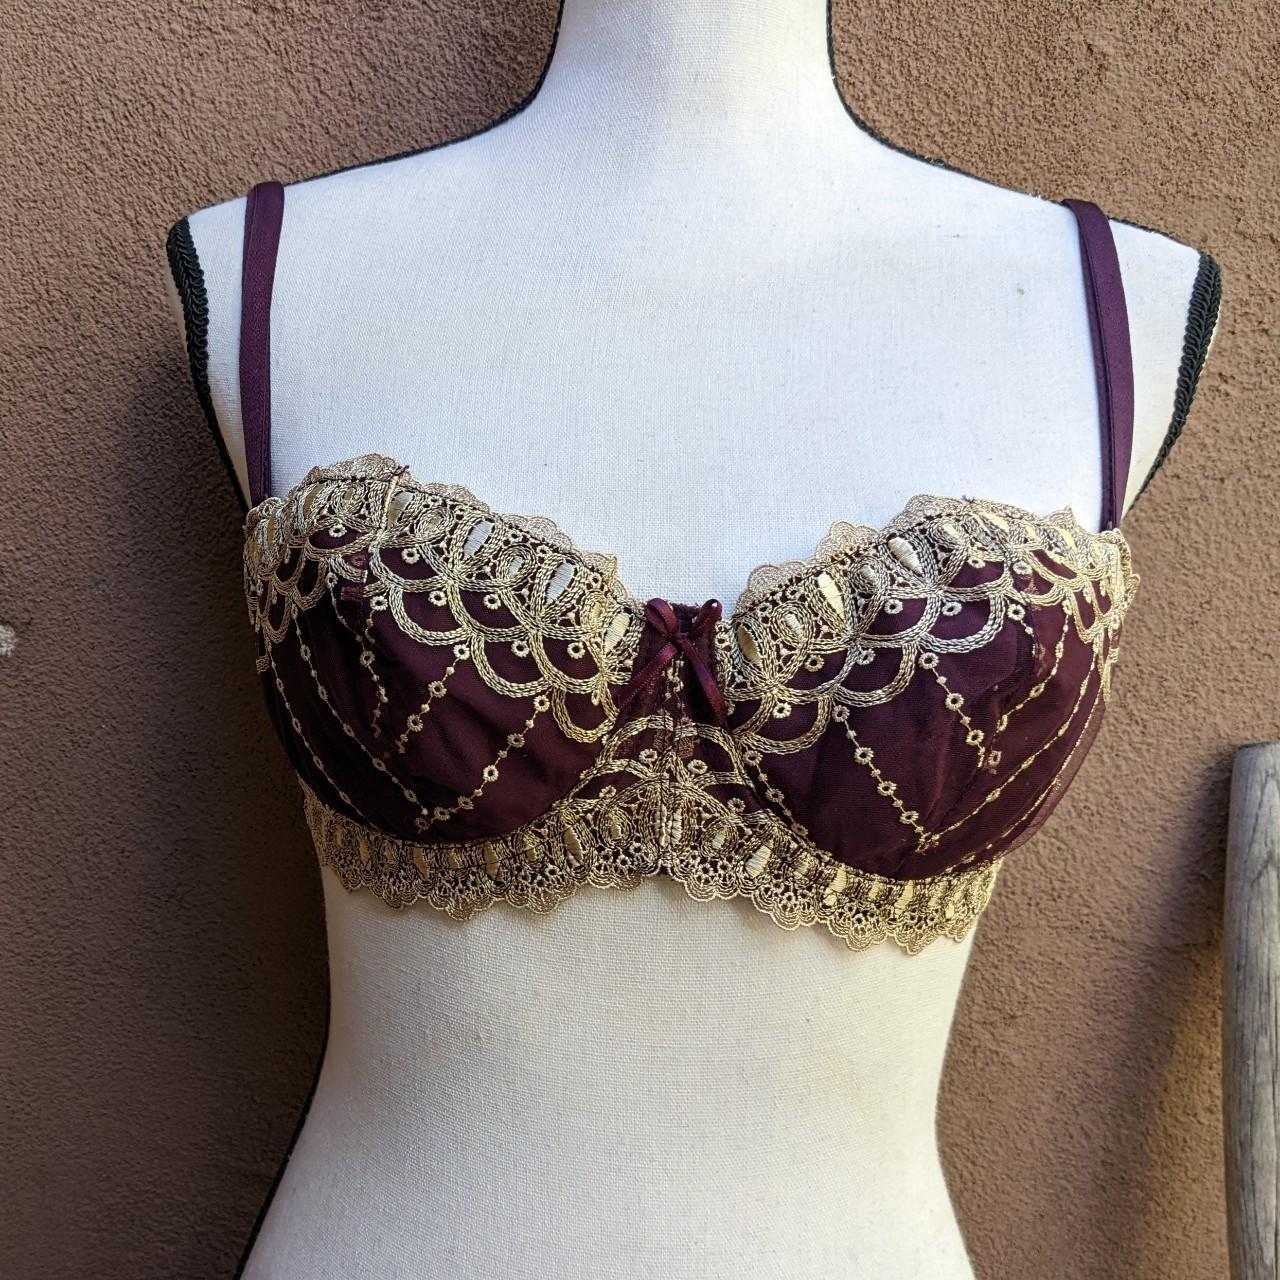 Frederick's of Hollywood Women's Burgundy and Gold Bra